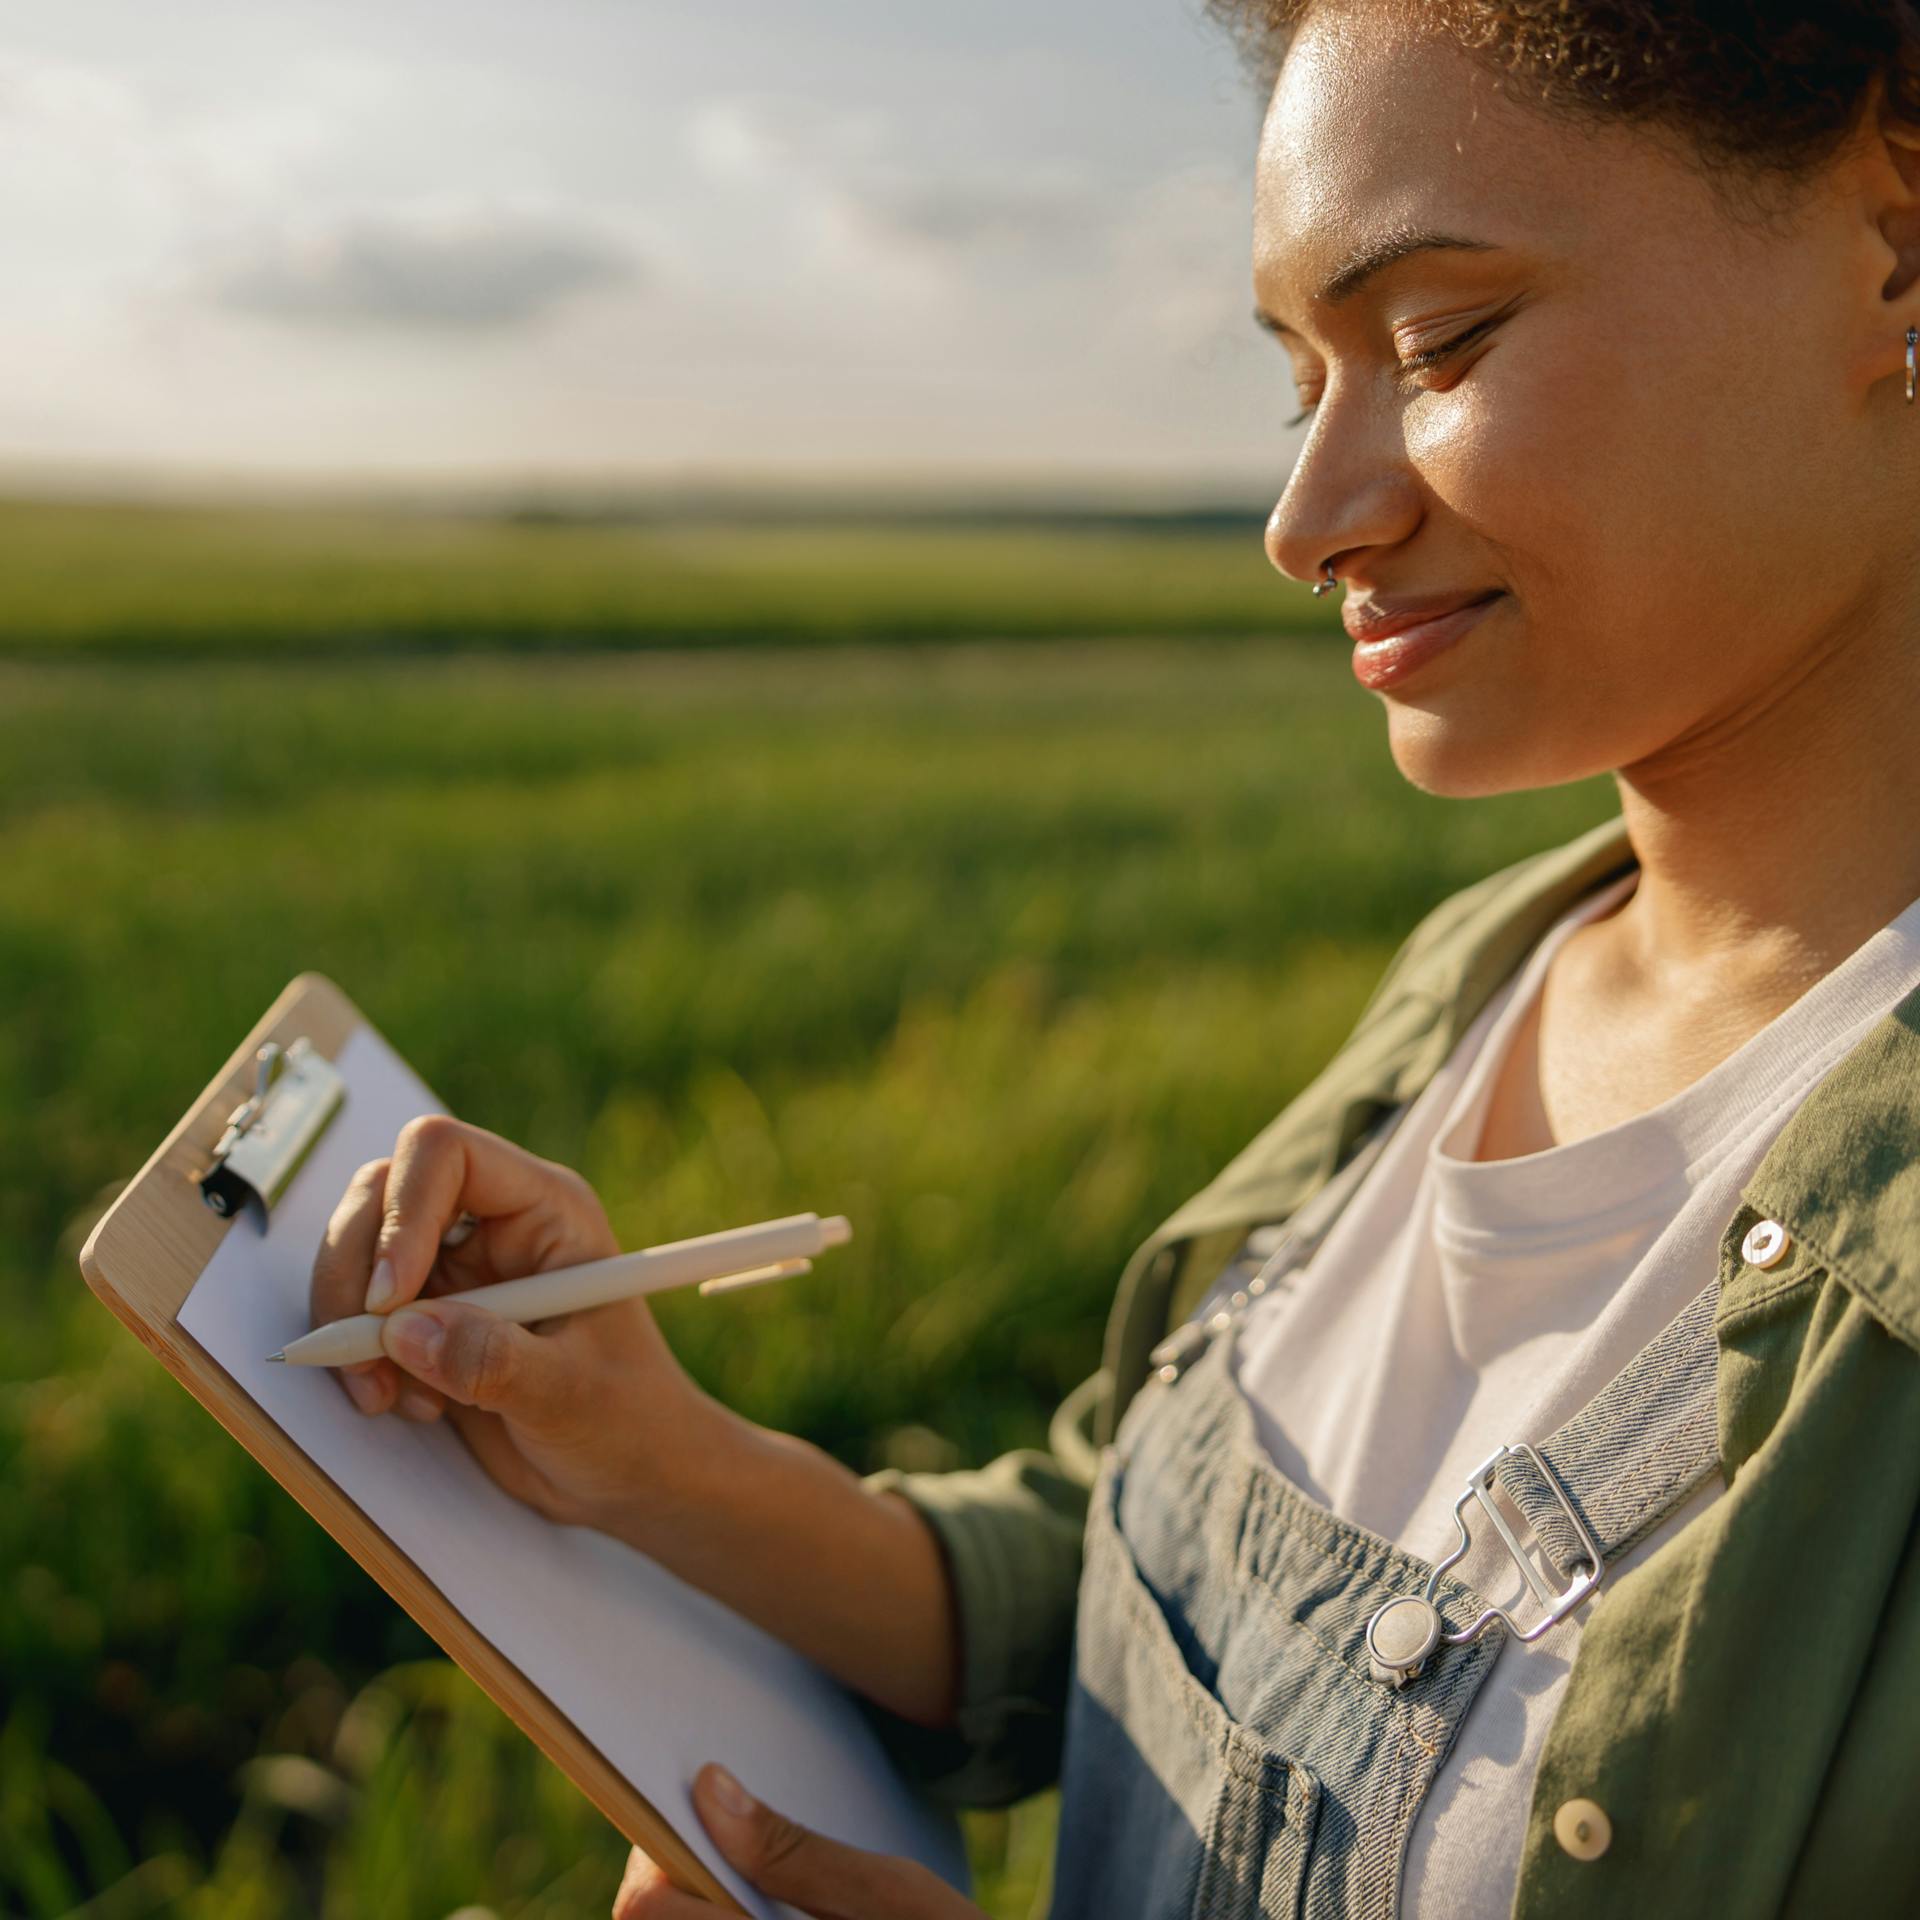 A woman in a sunny field writing notes on a clipboard